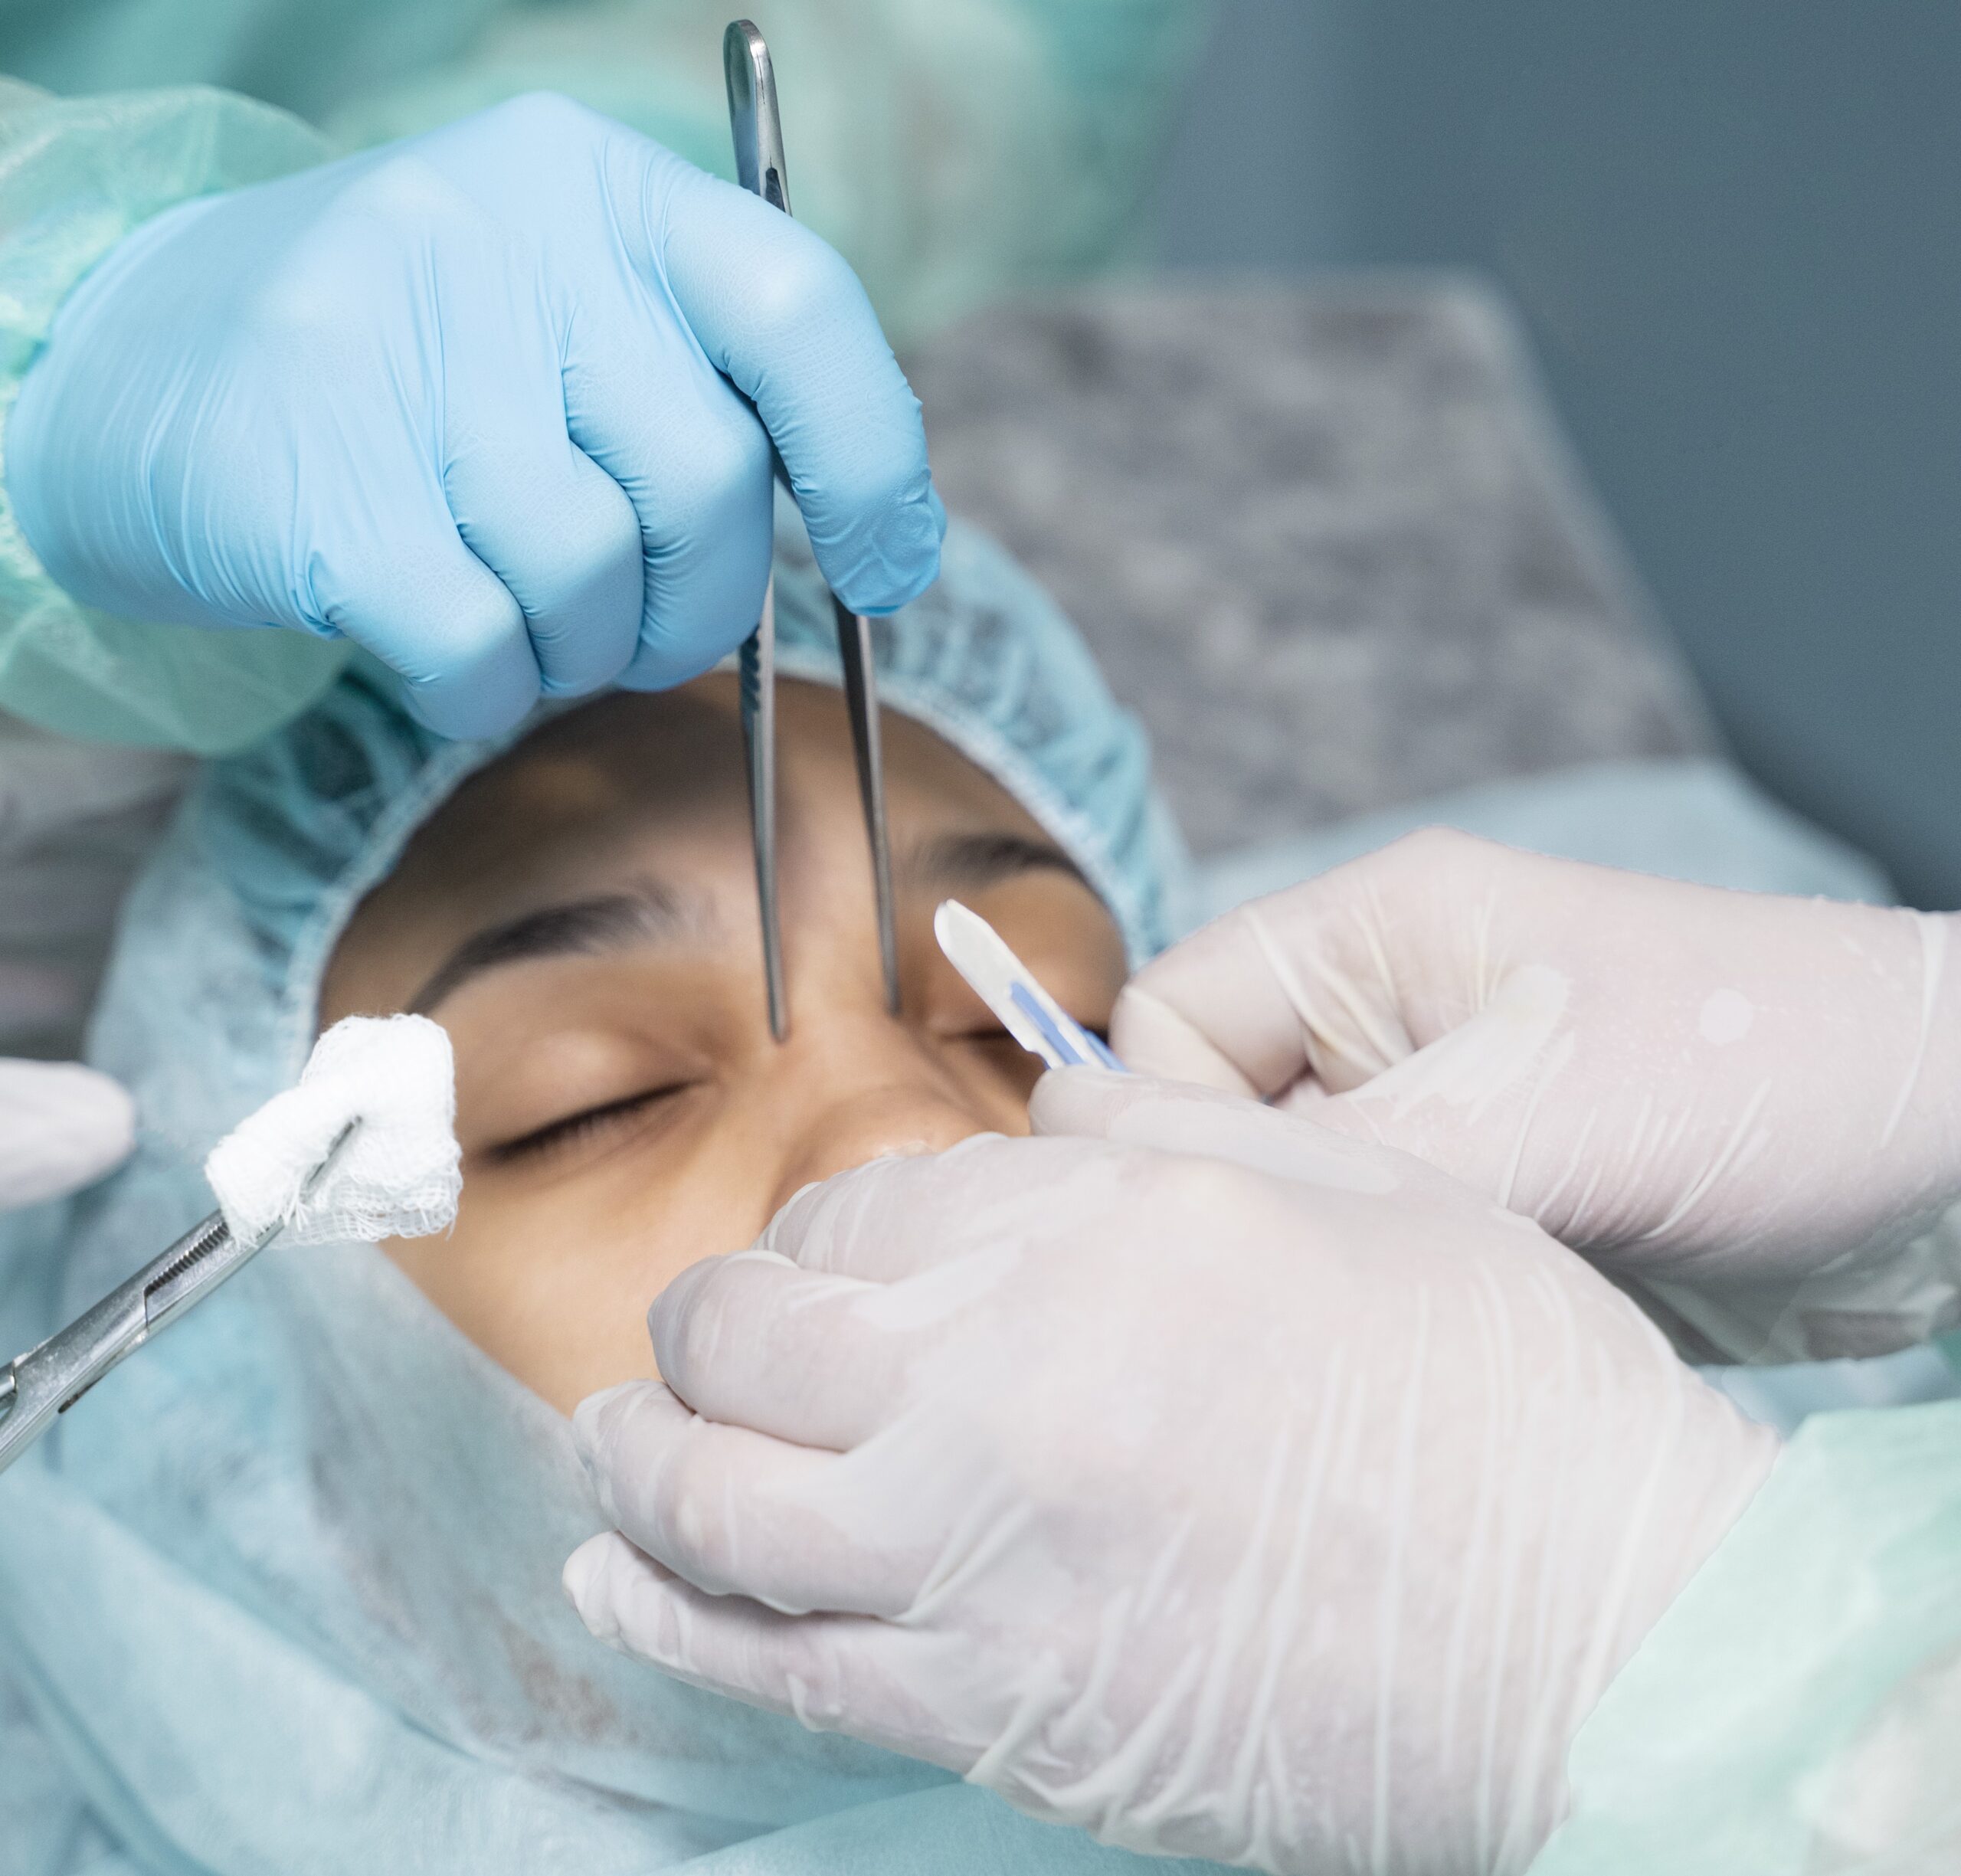 Revolutionizing Eye Surgery: The Rise of Single-Use Sterile Ophthalmic Instruments